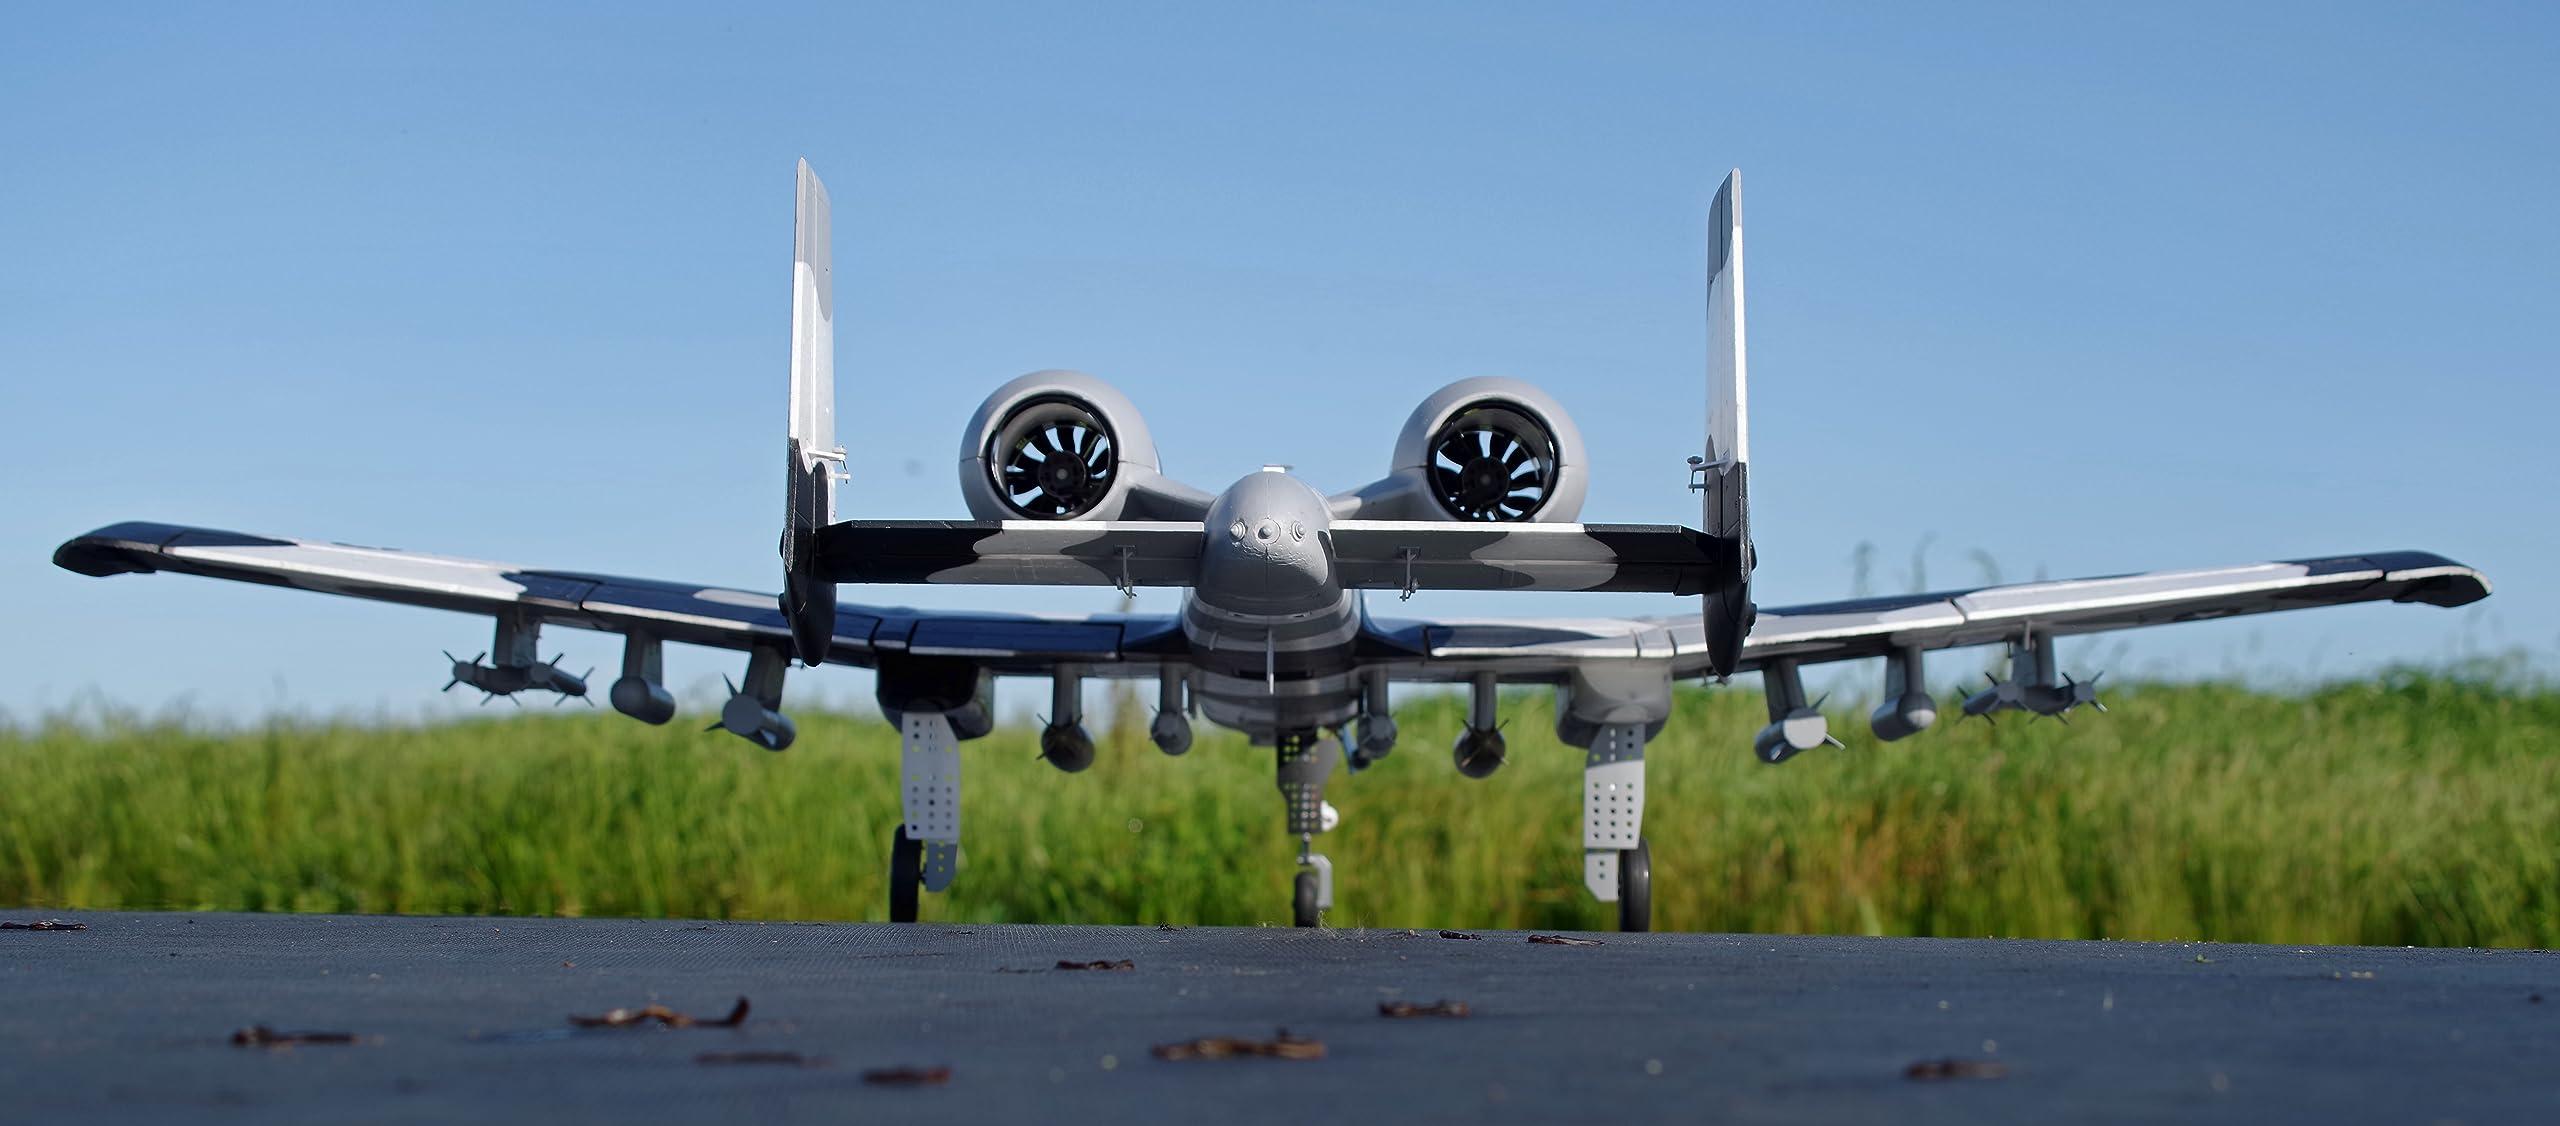 Rc Planes A 10: The A-10: A Unique, Powerful, and Precise RC Plane for Enthusiasts